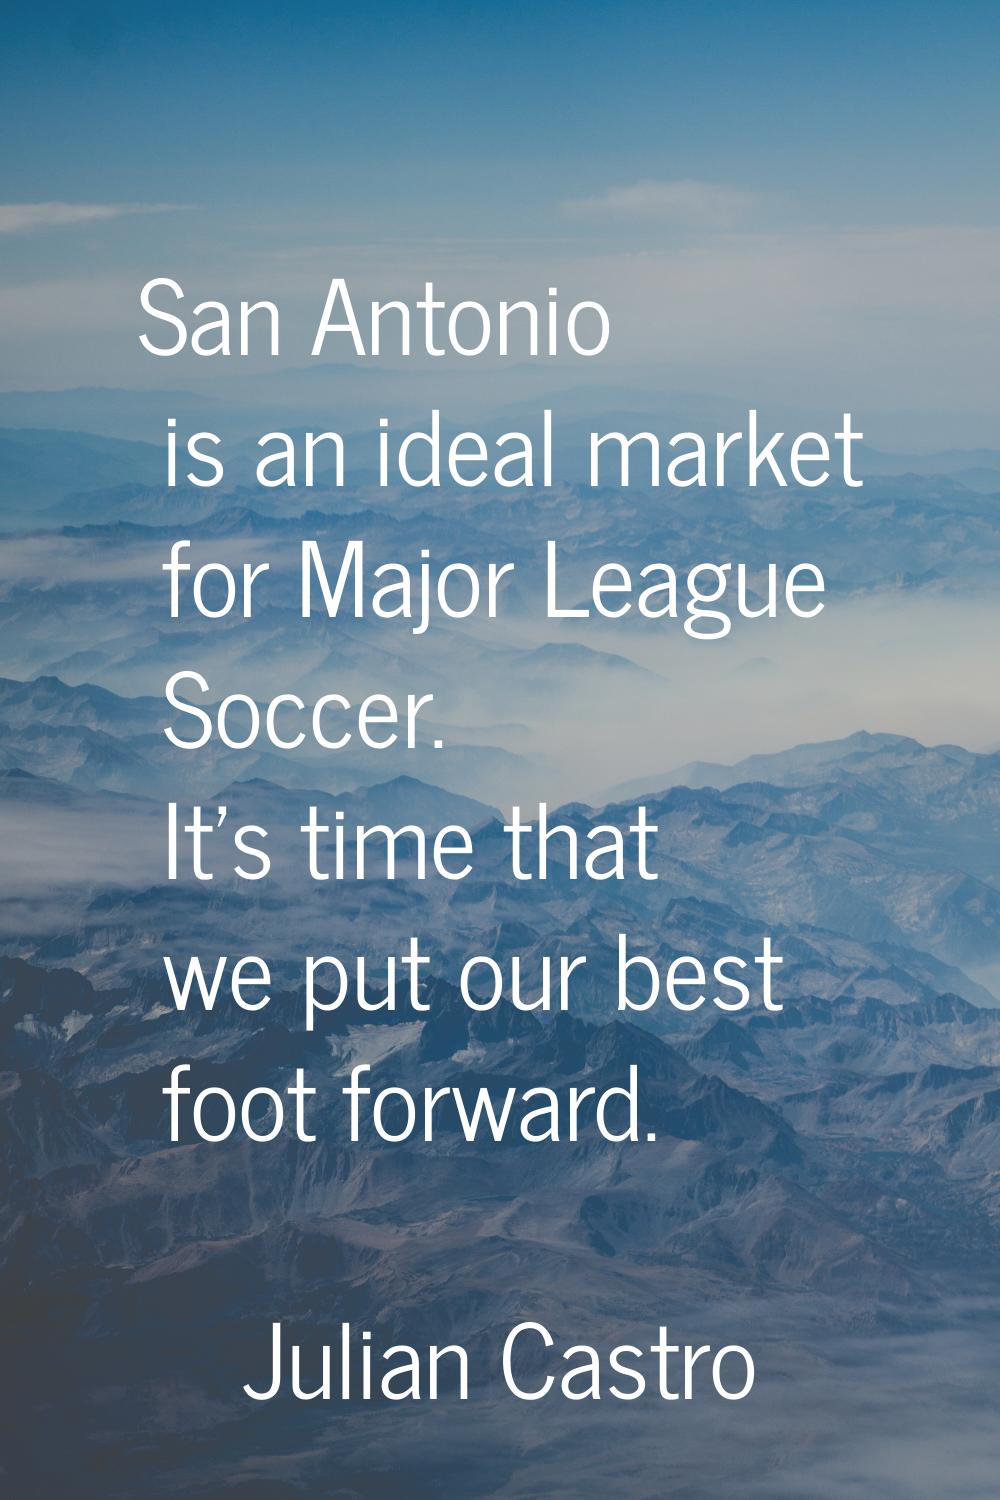 San Antonio is an ideal market for Major League Soccer. It's time that we put our best foot forward